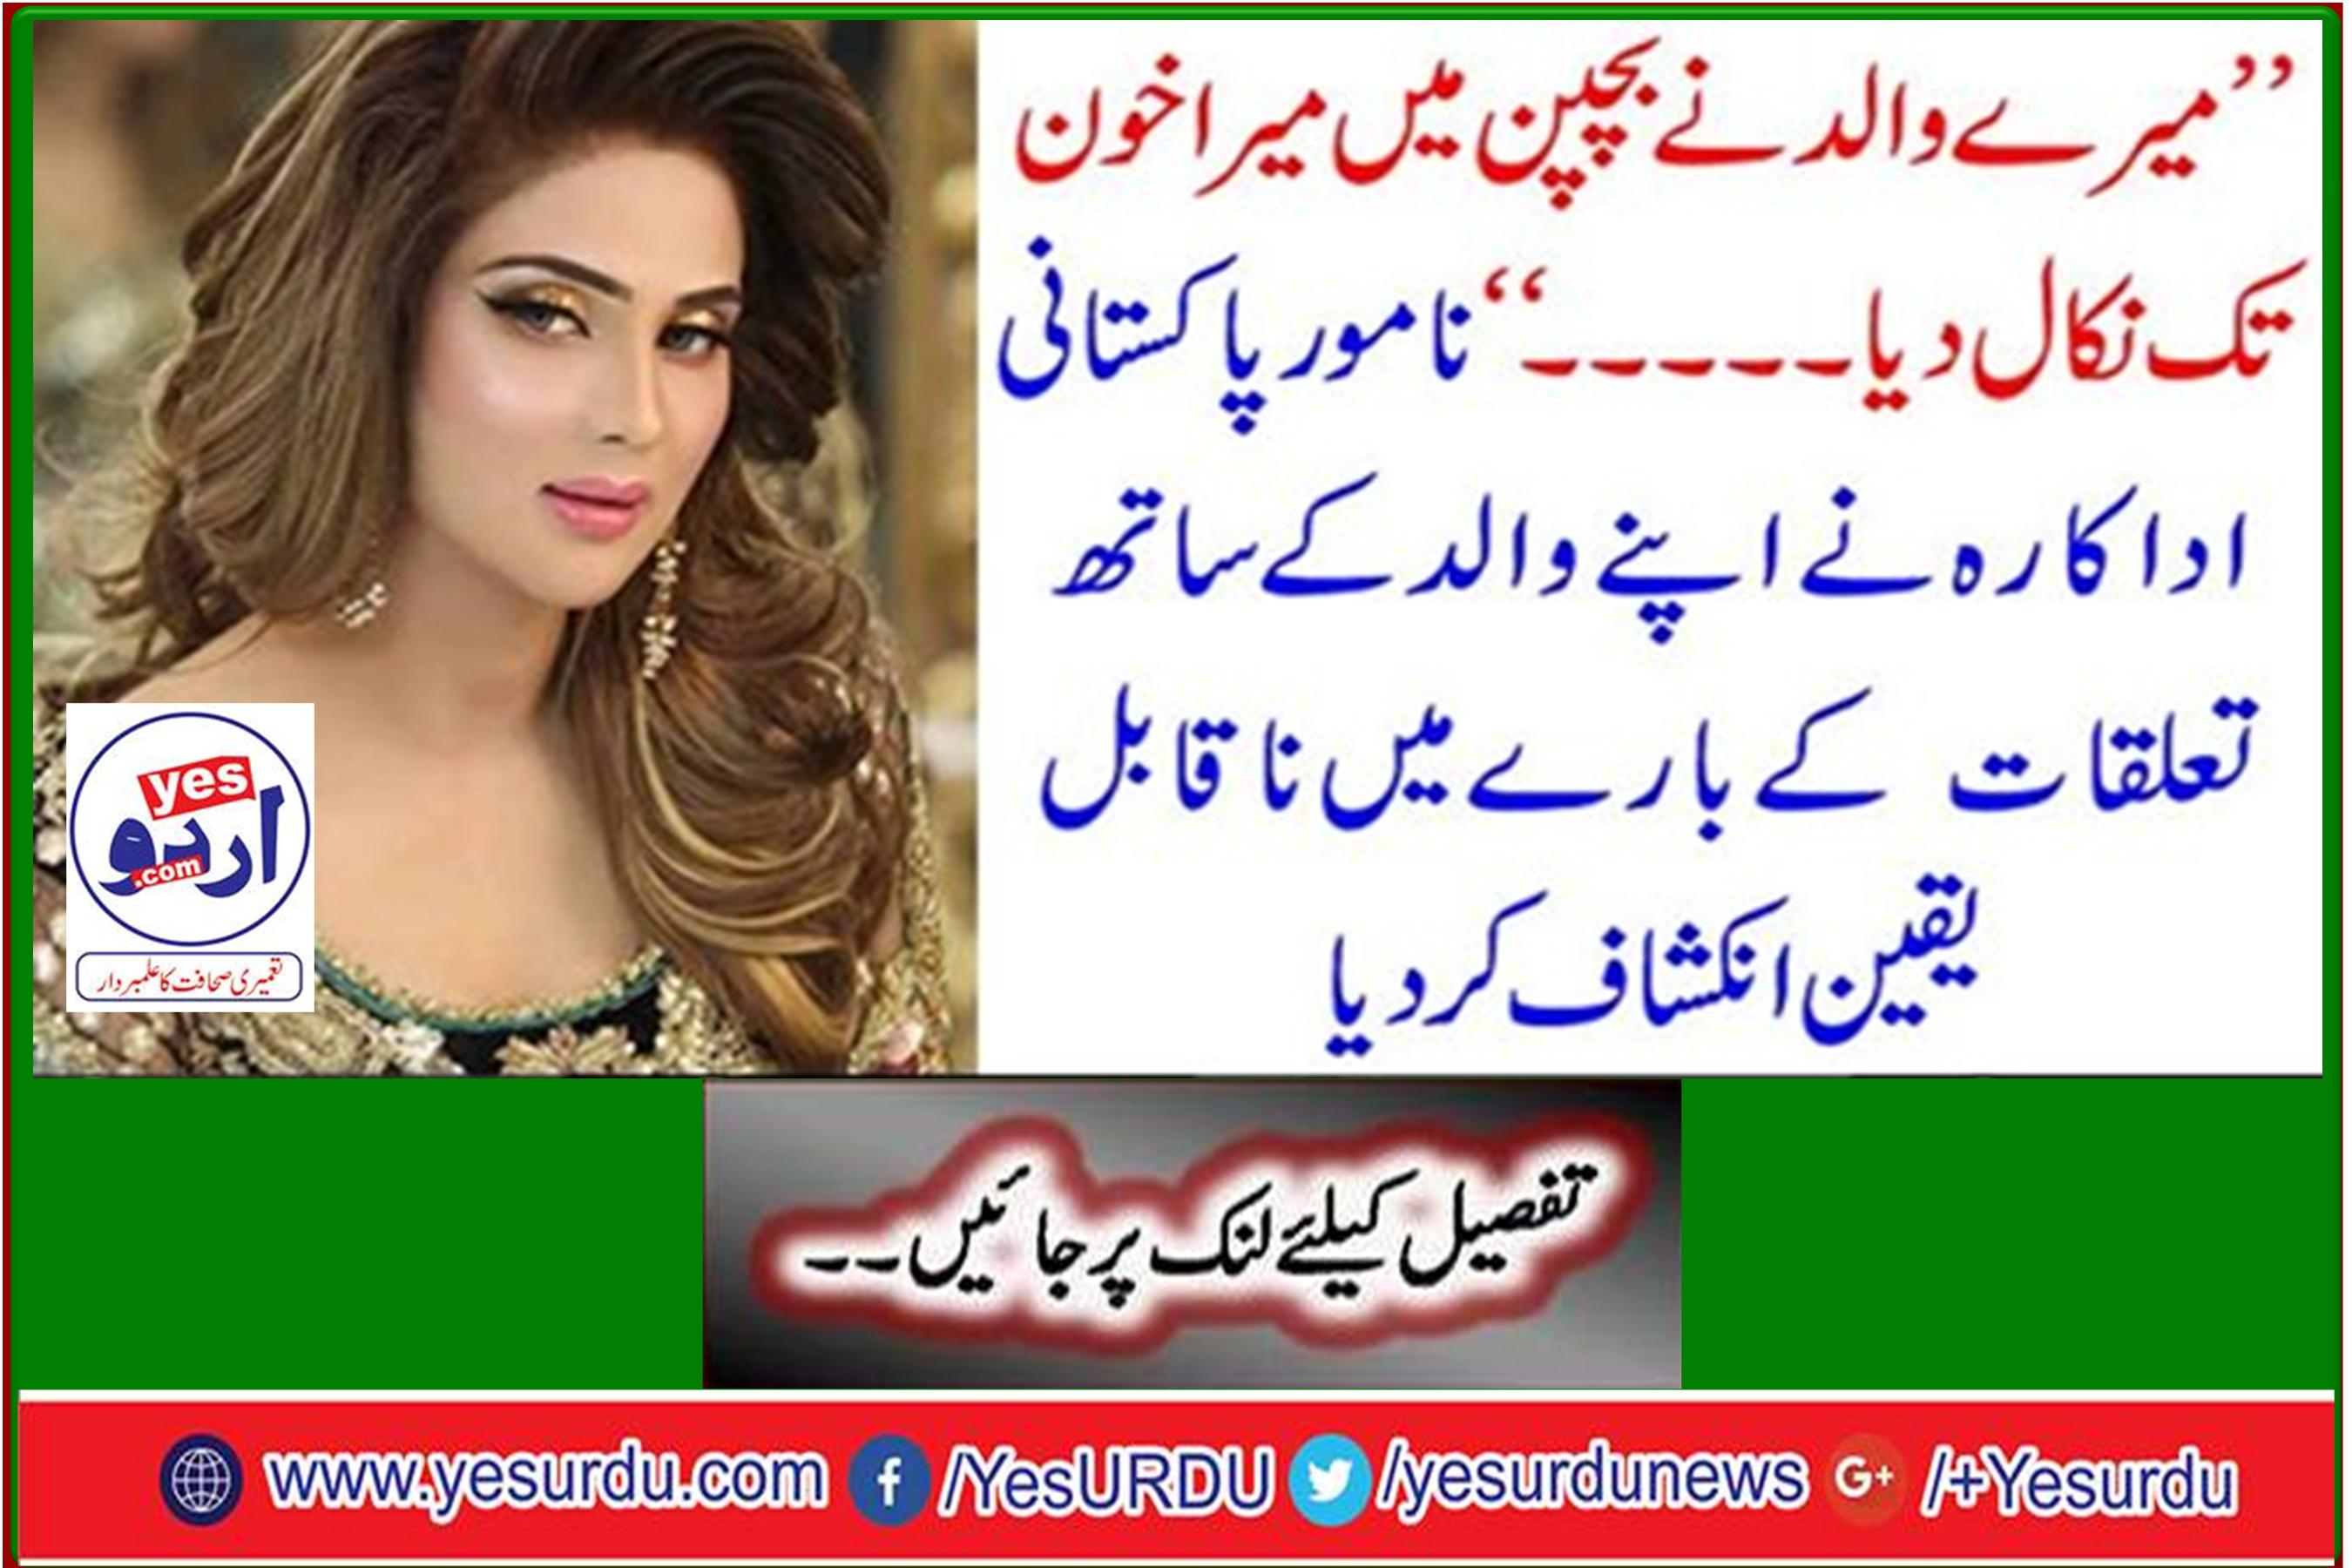 'The renowned Pakistani actress made an incredible discovery about her relationship with her father